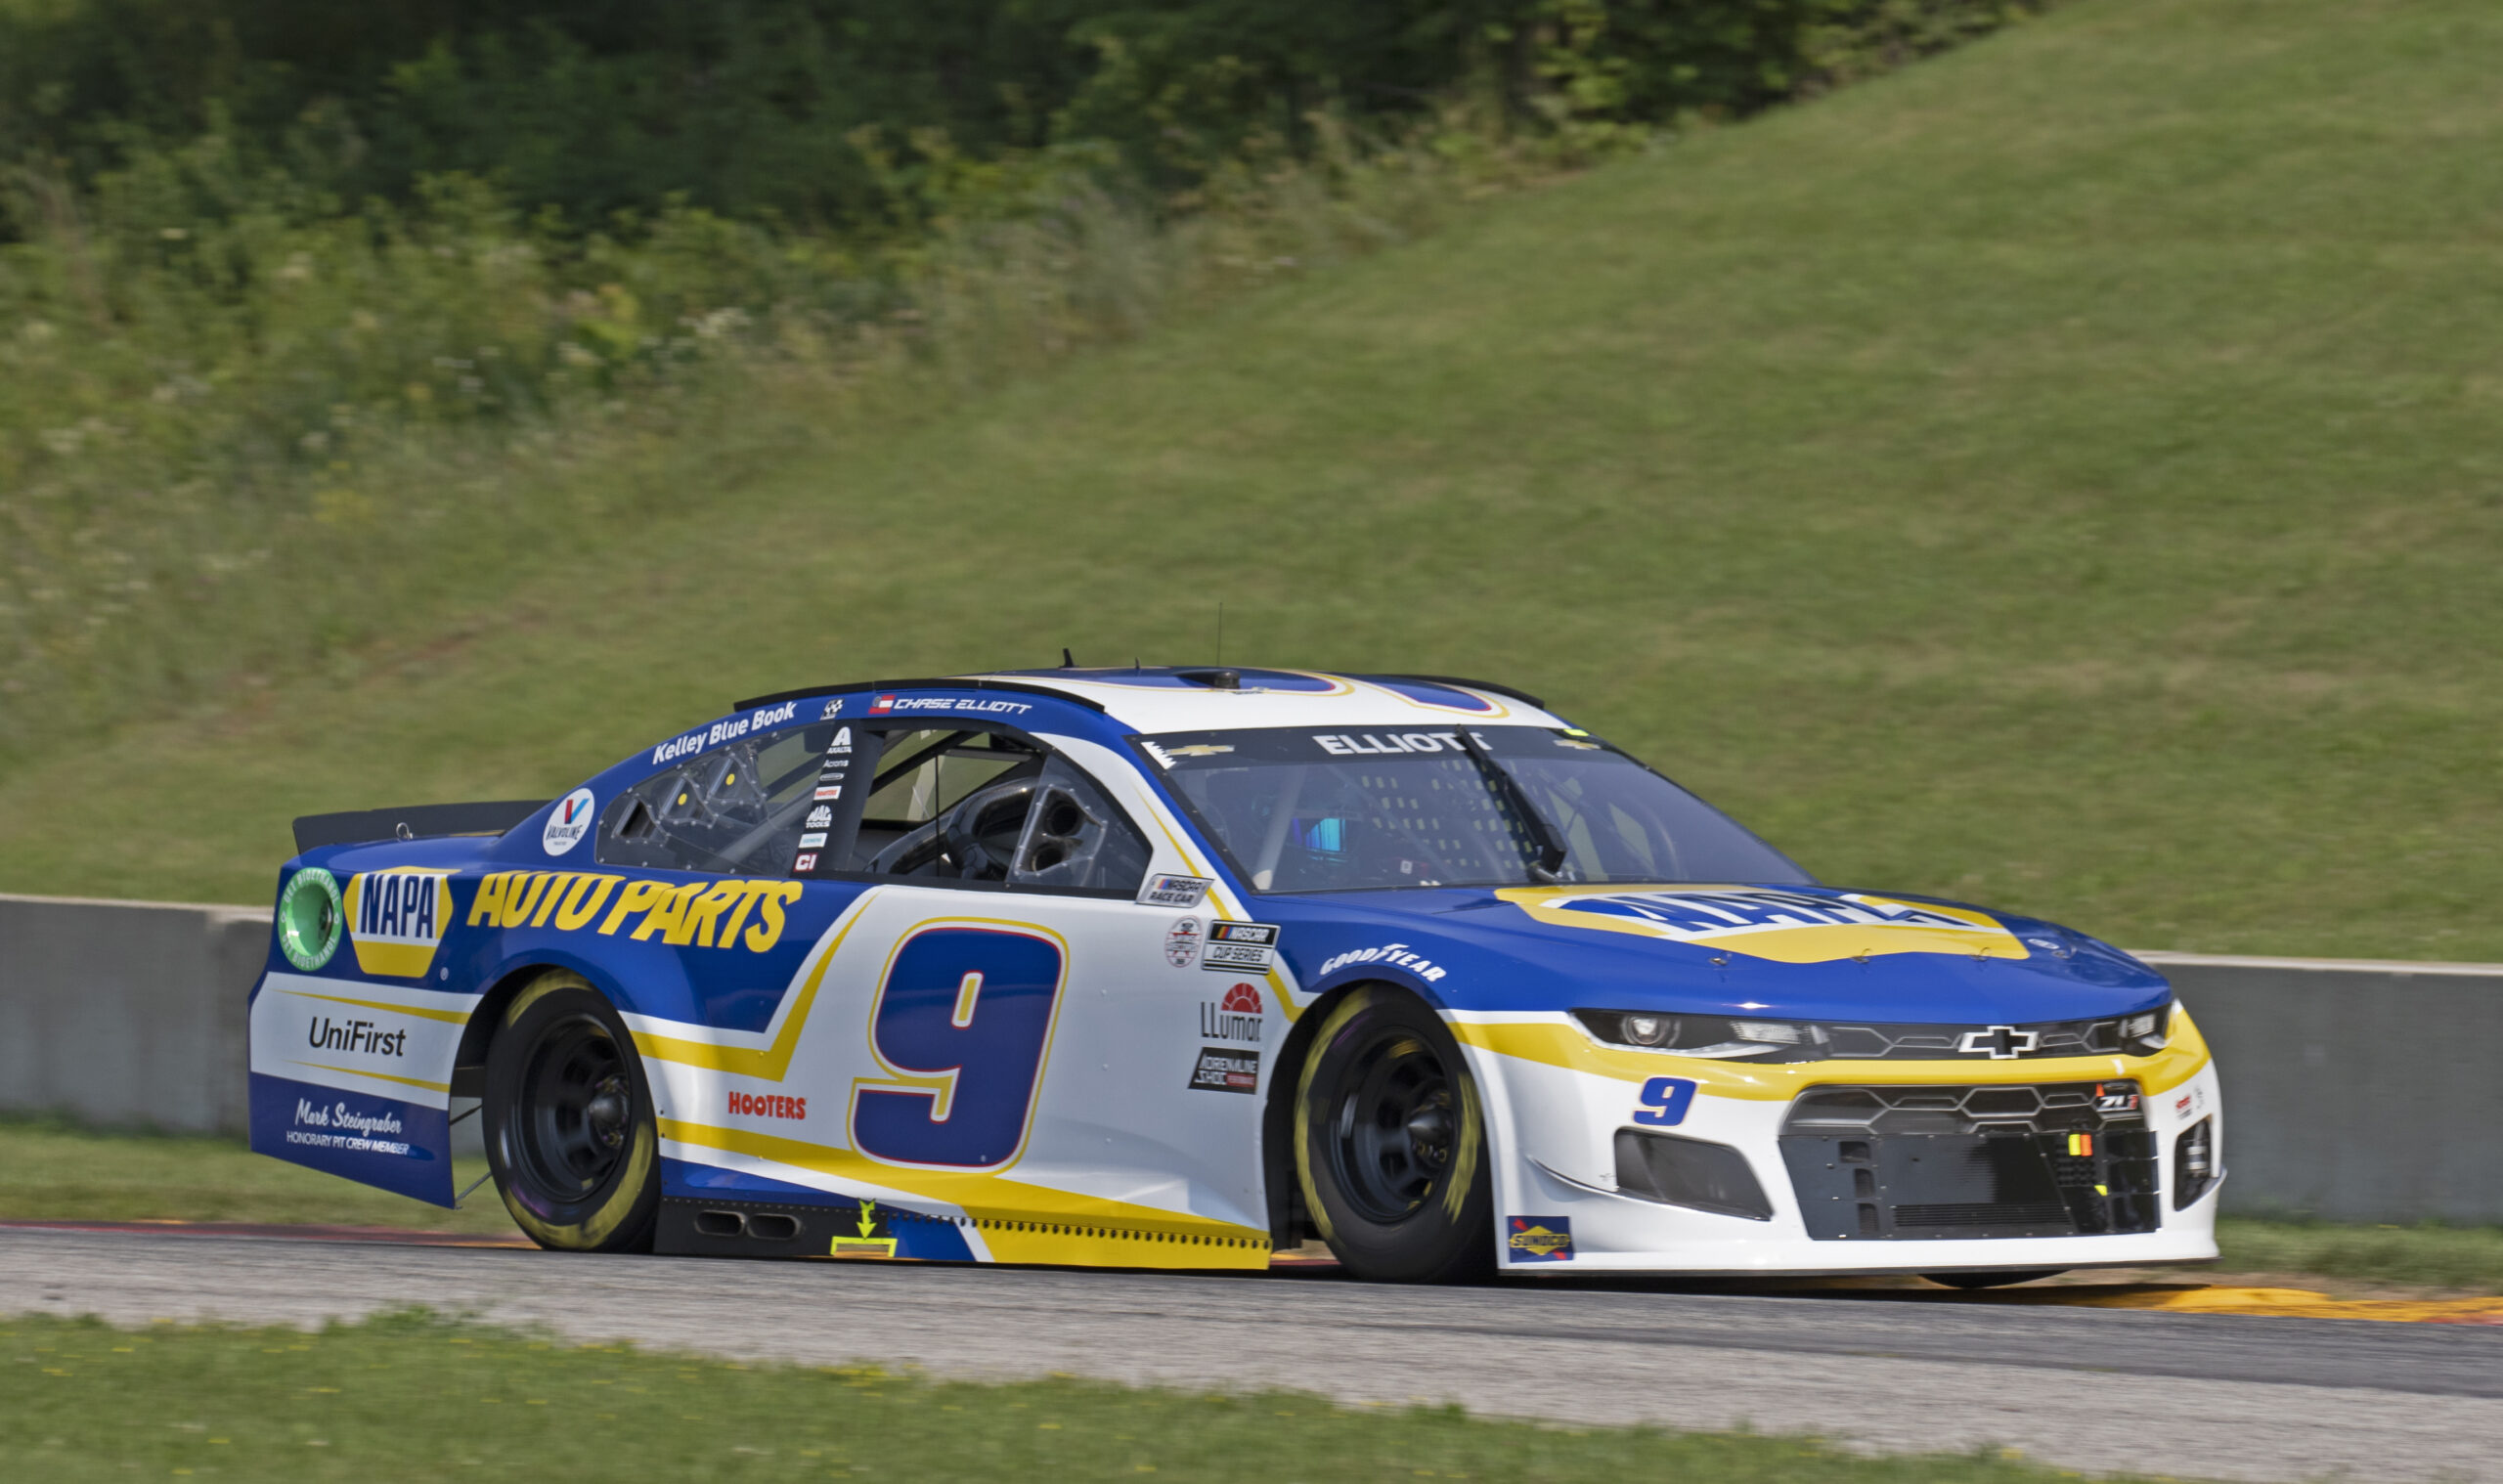 Surely, Chase Elliott scored a rather impressive win at Road America. (Photo: Mike Moore/The Podium Finish)